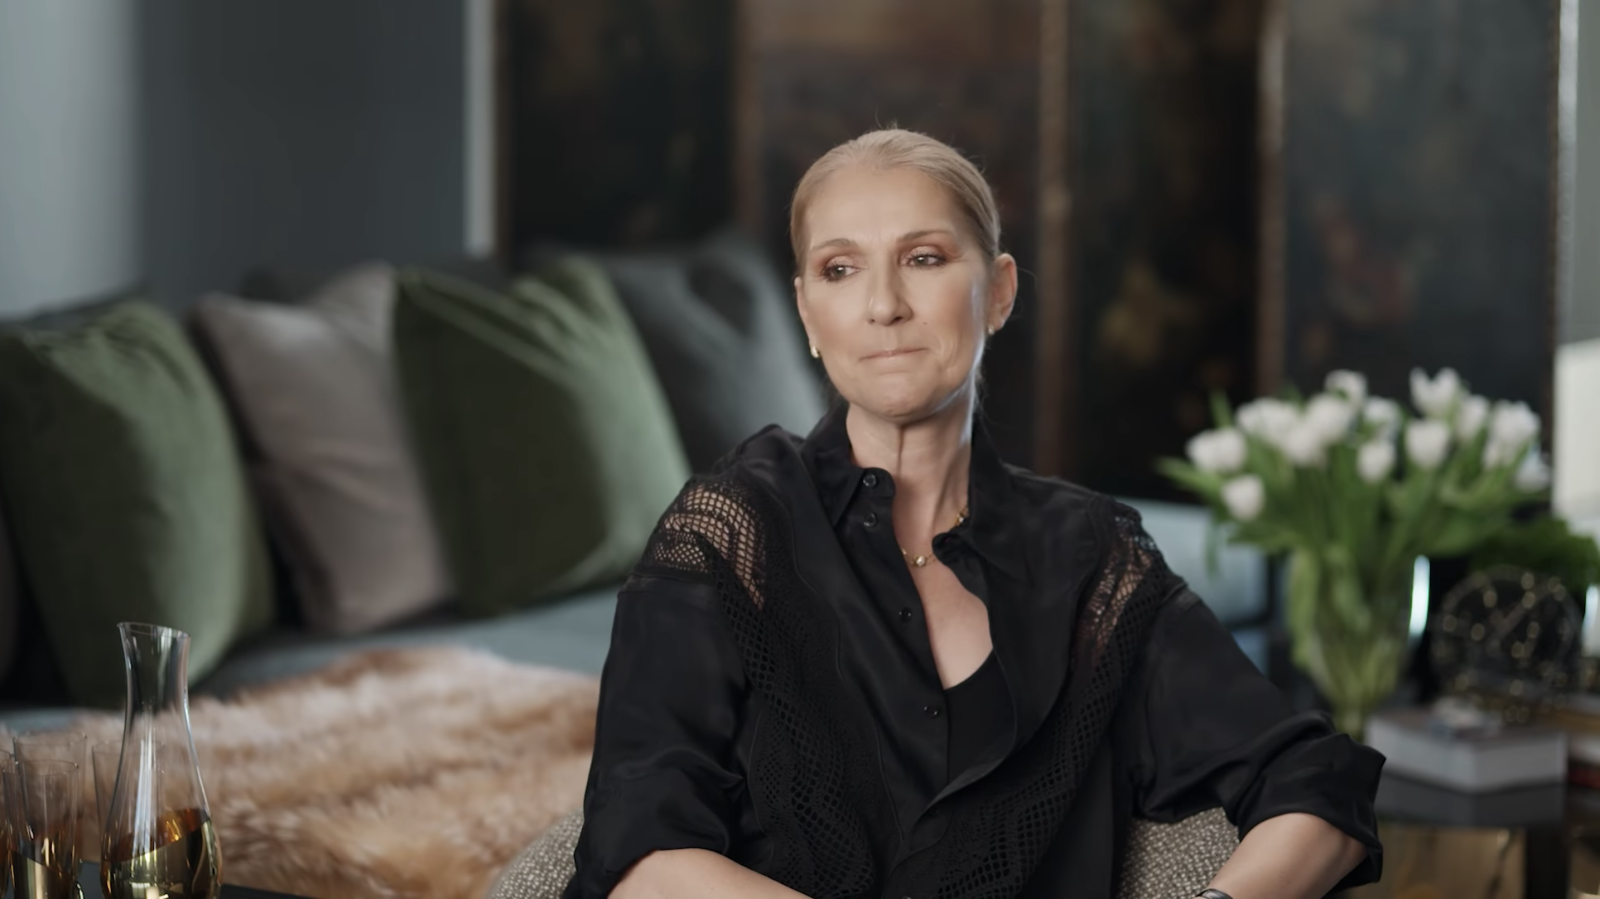 Celine Dion forced to postpone Manchester AO Arena gigs AGAIN due to health issues, The Manc